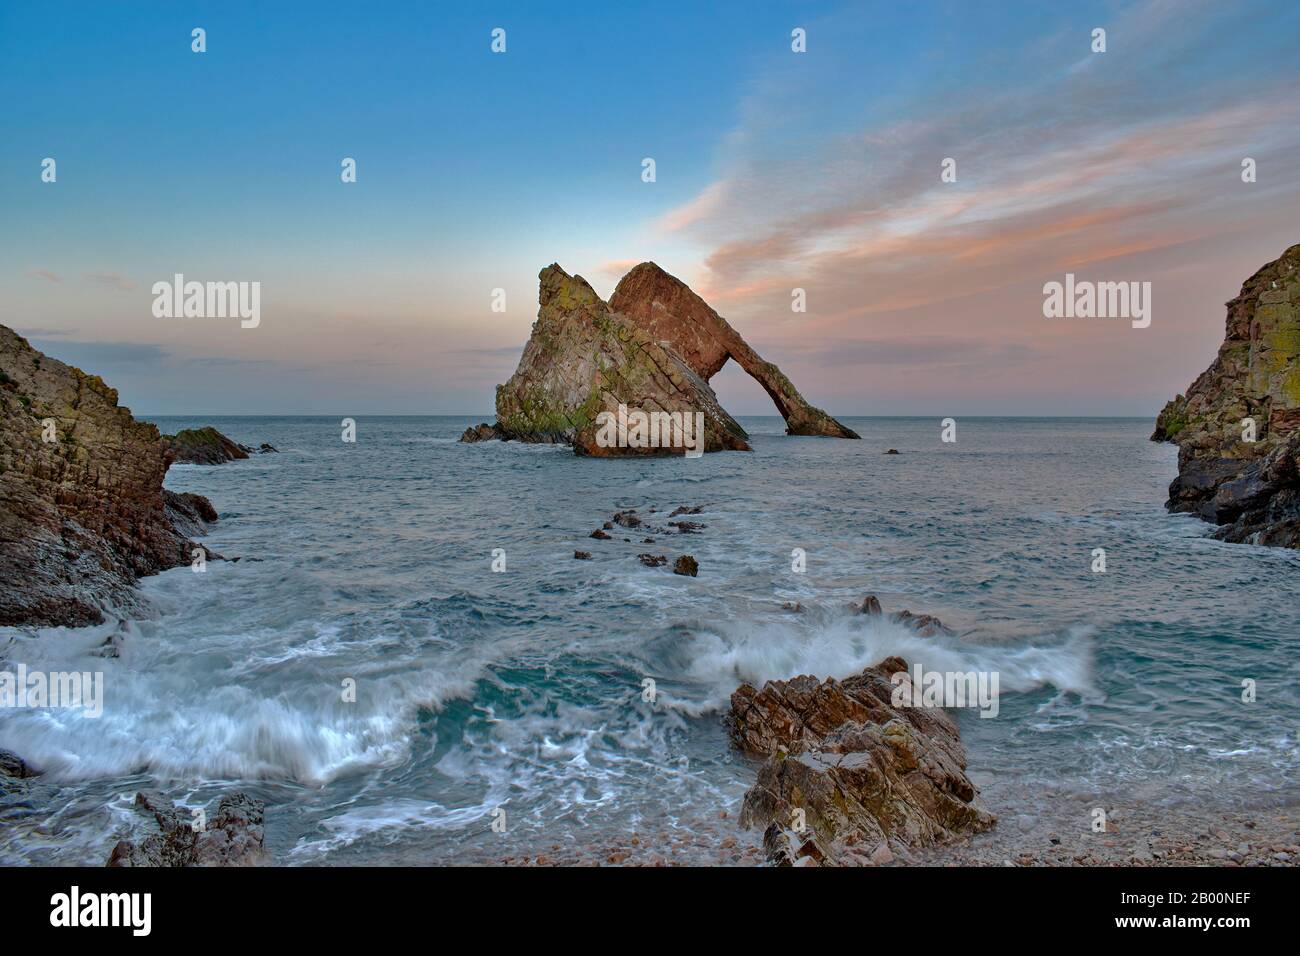 BOW FIDDLE ROCK PORTKNOCKIE MORAY FIRTH SCOTLAND WINTER PINK CLOUD SUNSET WITH WAVES BREAKING ON ROCKS AND PEBBLE BEACH Stock Photo